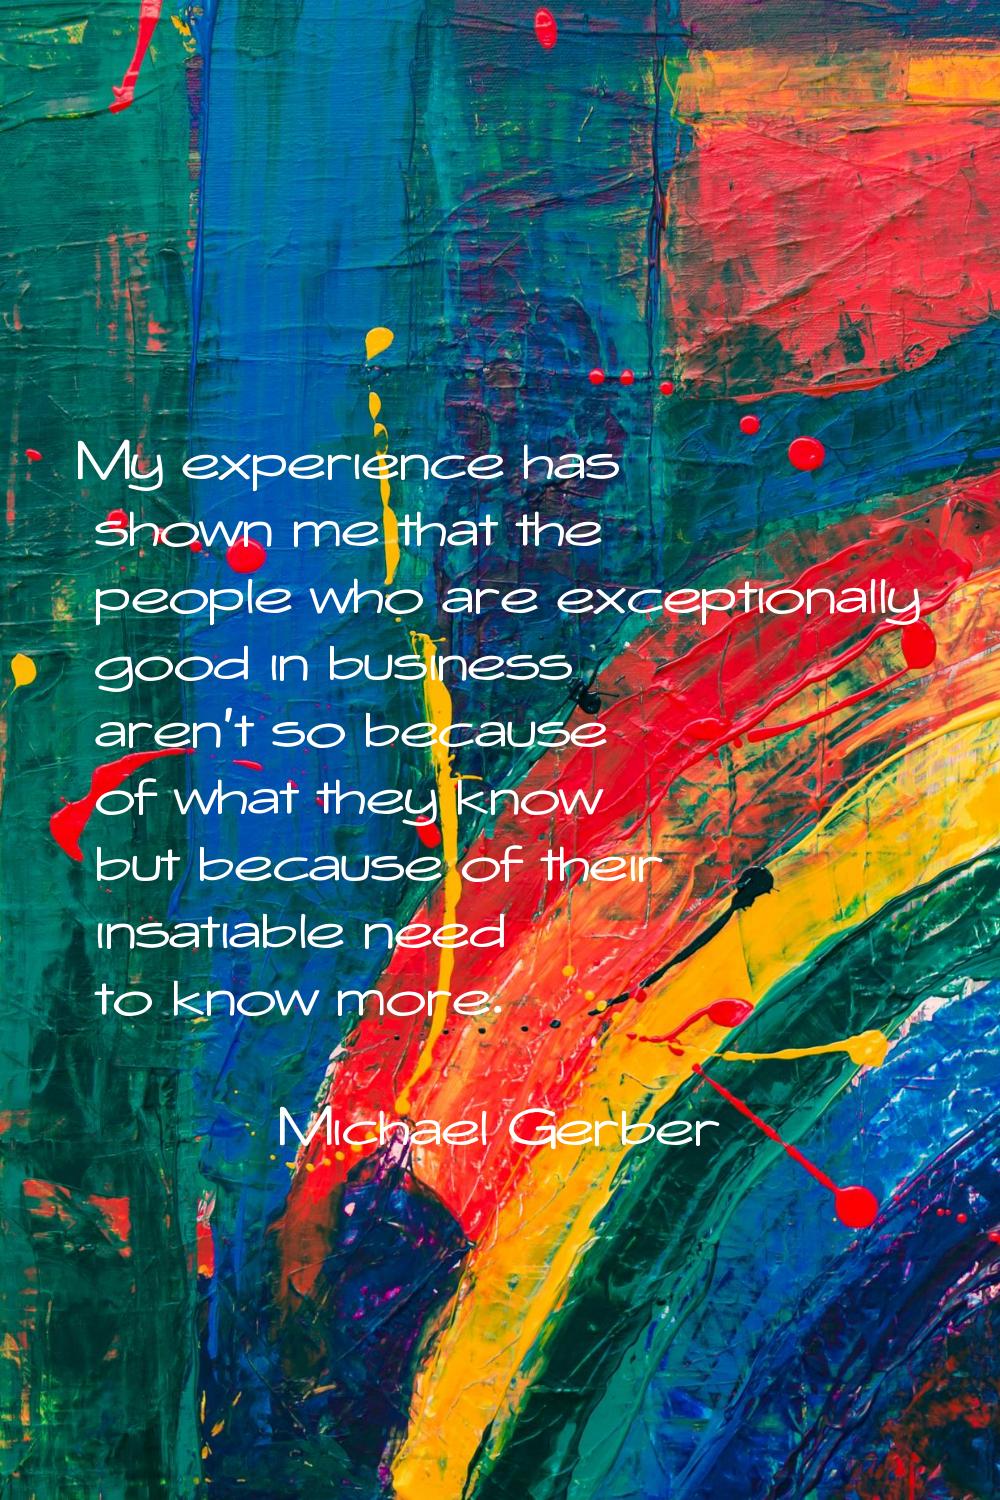 My experience has shown me that the people who are exceptionally good in business aren't so because